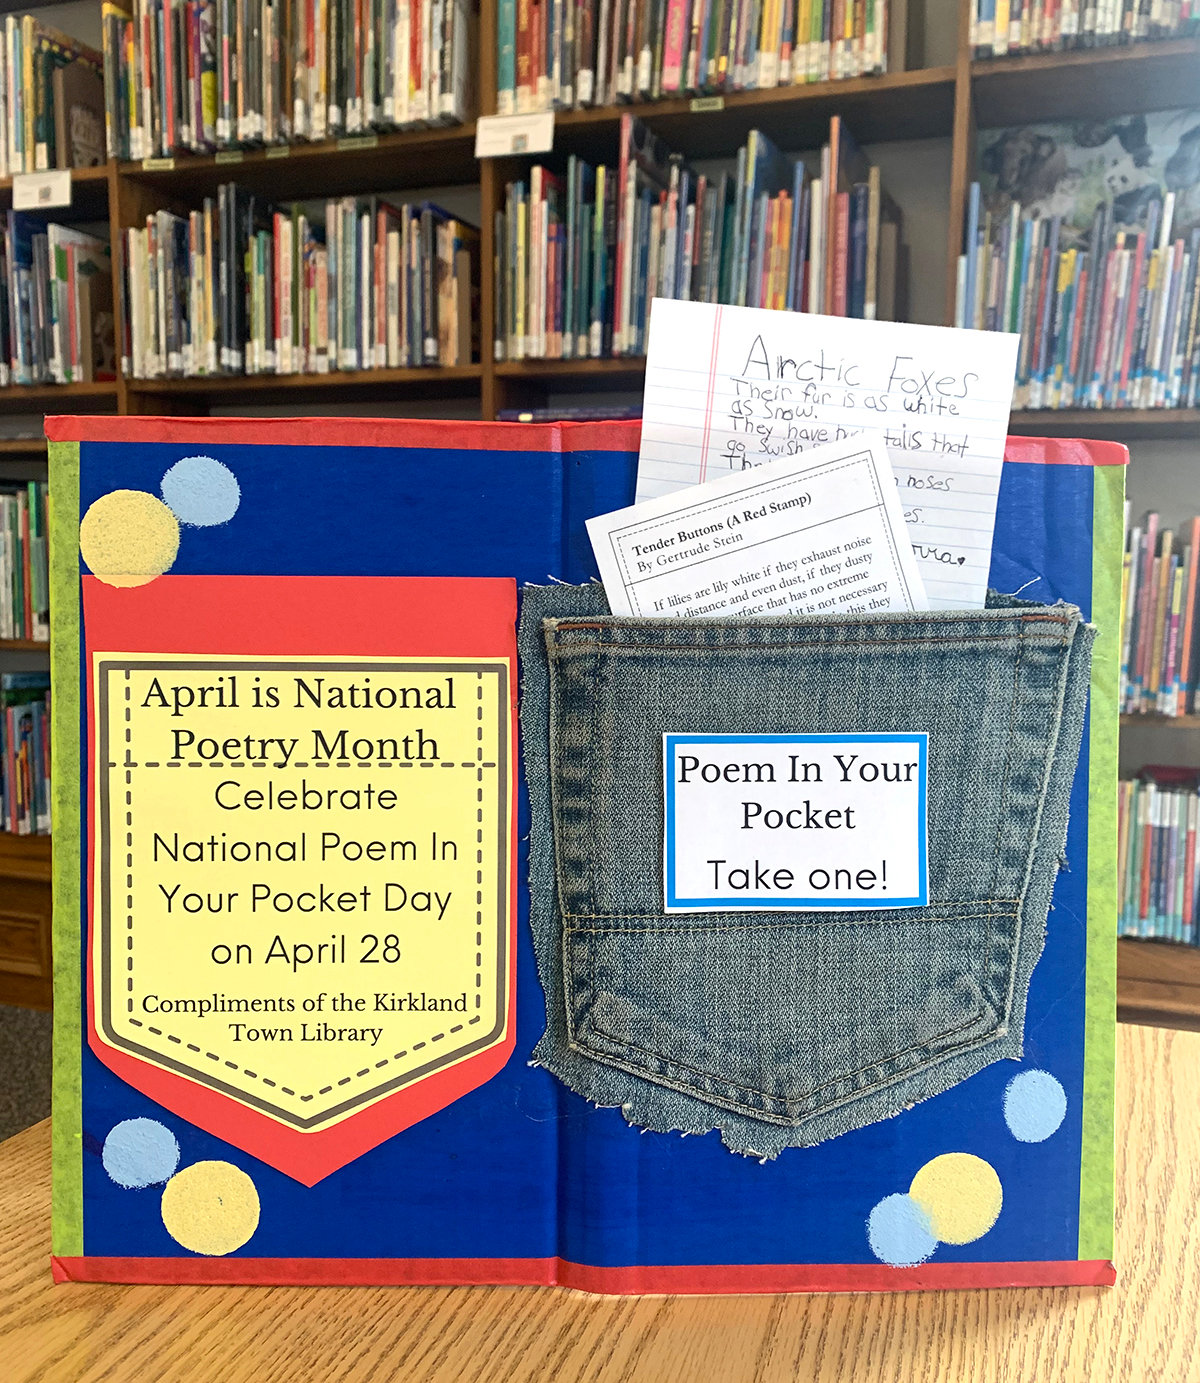 POETRY MONTH — To commemorate National Poetry Month, Kirkland Town Library is offering the Poem In Your Pocket display, where patrons can find poems to read and take.